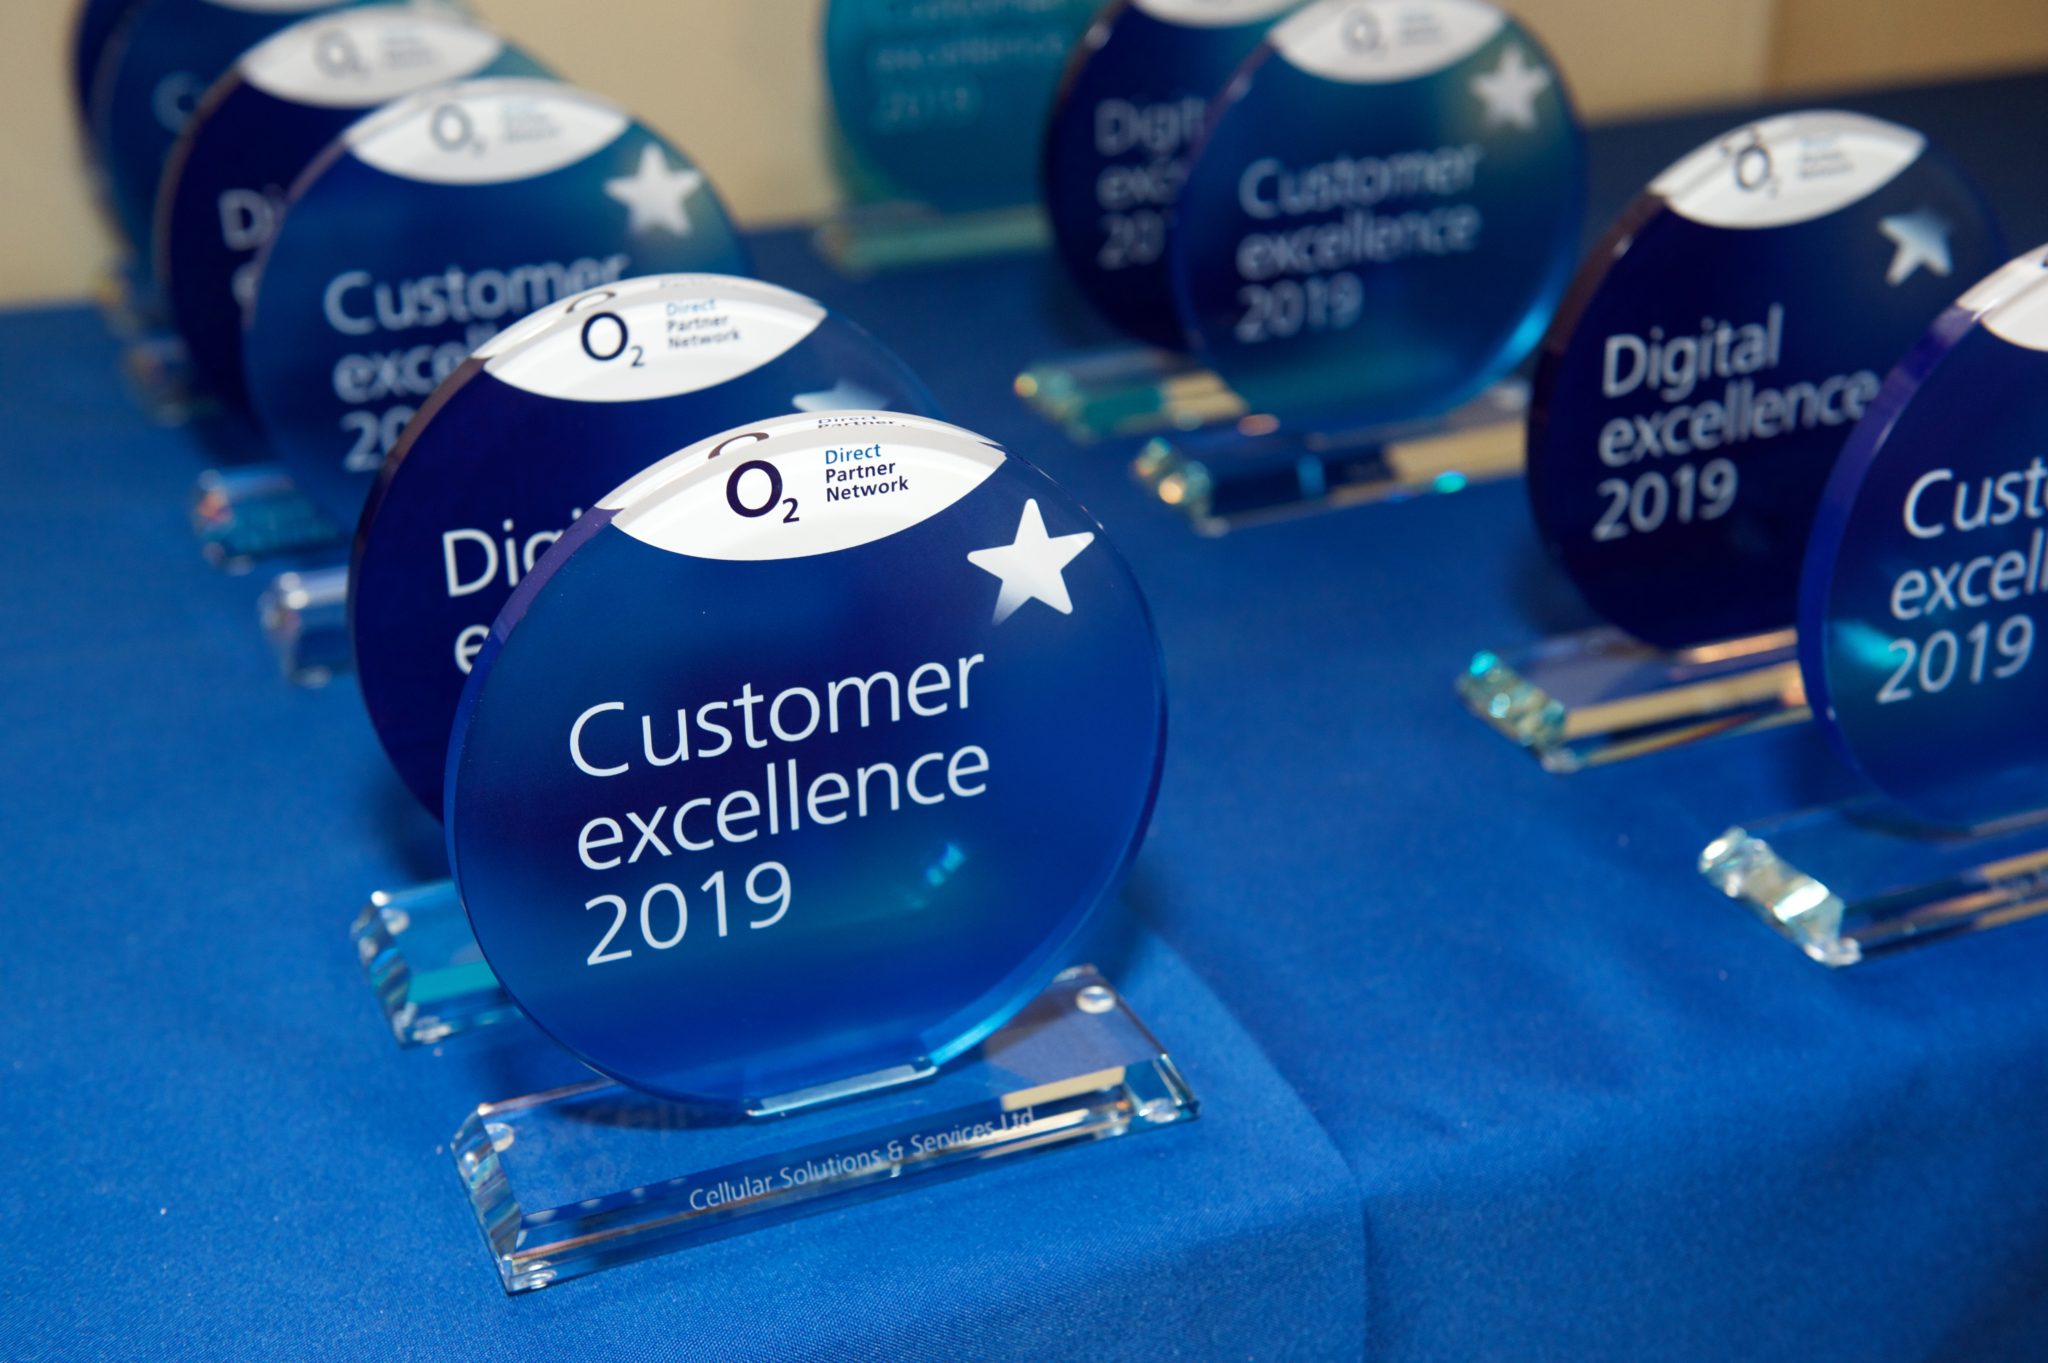 O2 Announces Winners of its Customer and Digital Excellence Awards